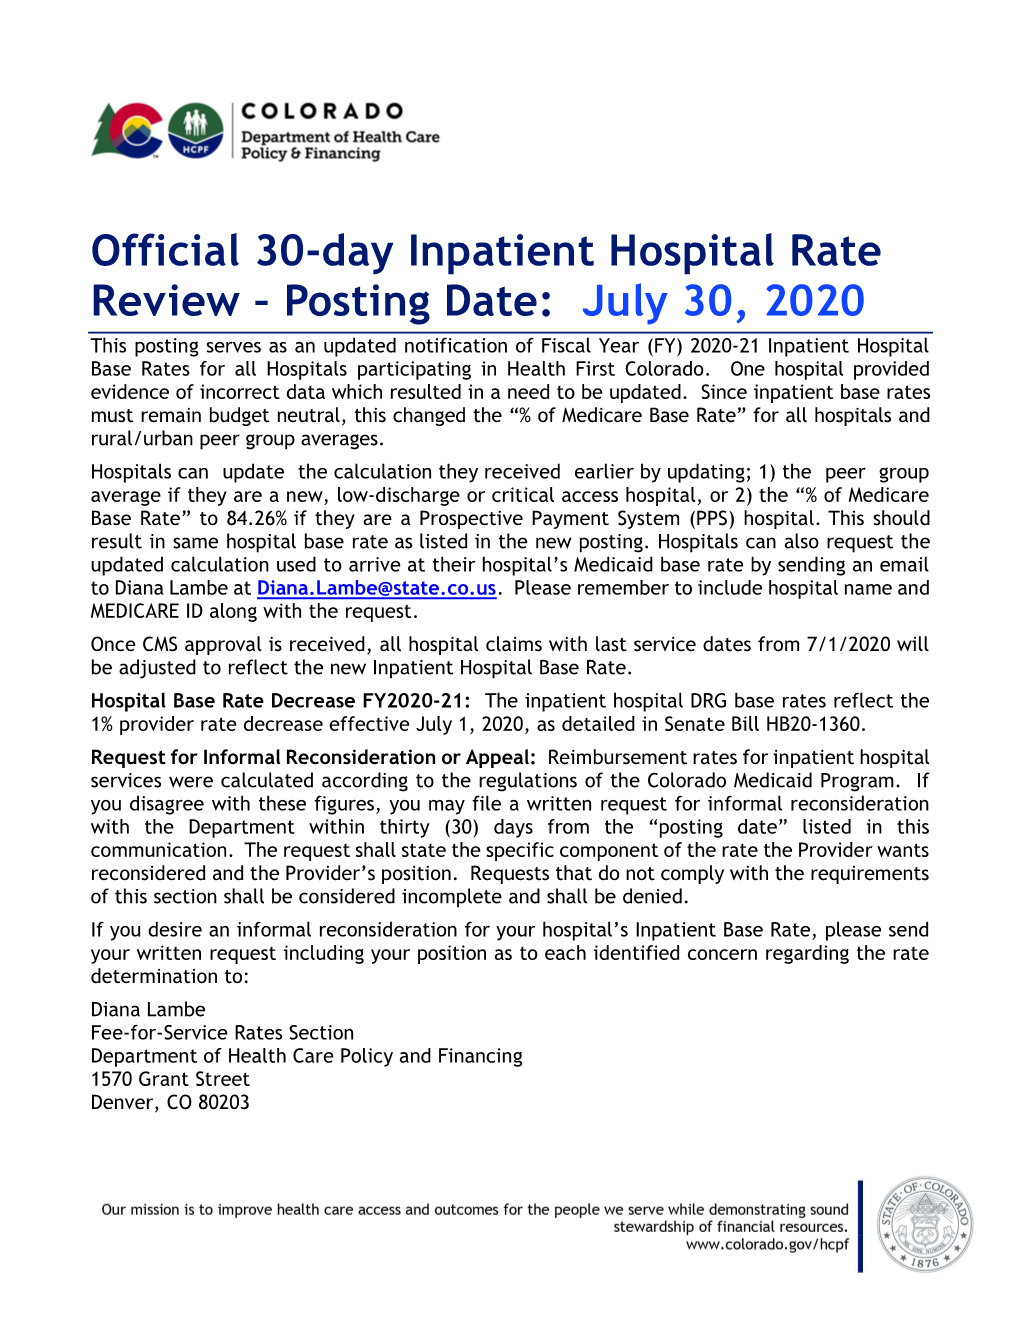 Official 30-Day Inpatient Hospital Rate Review – Posting Date